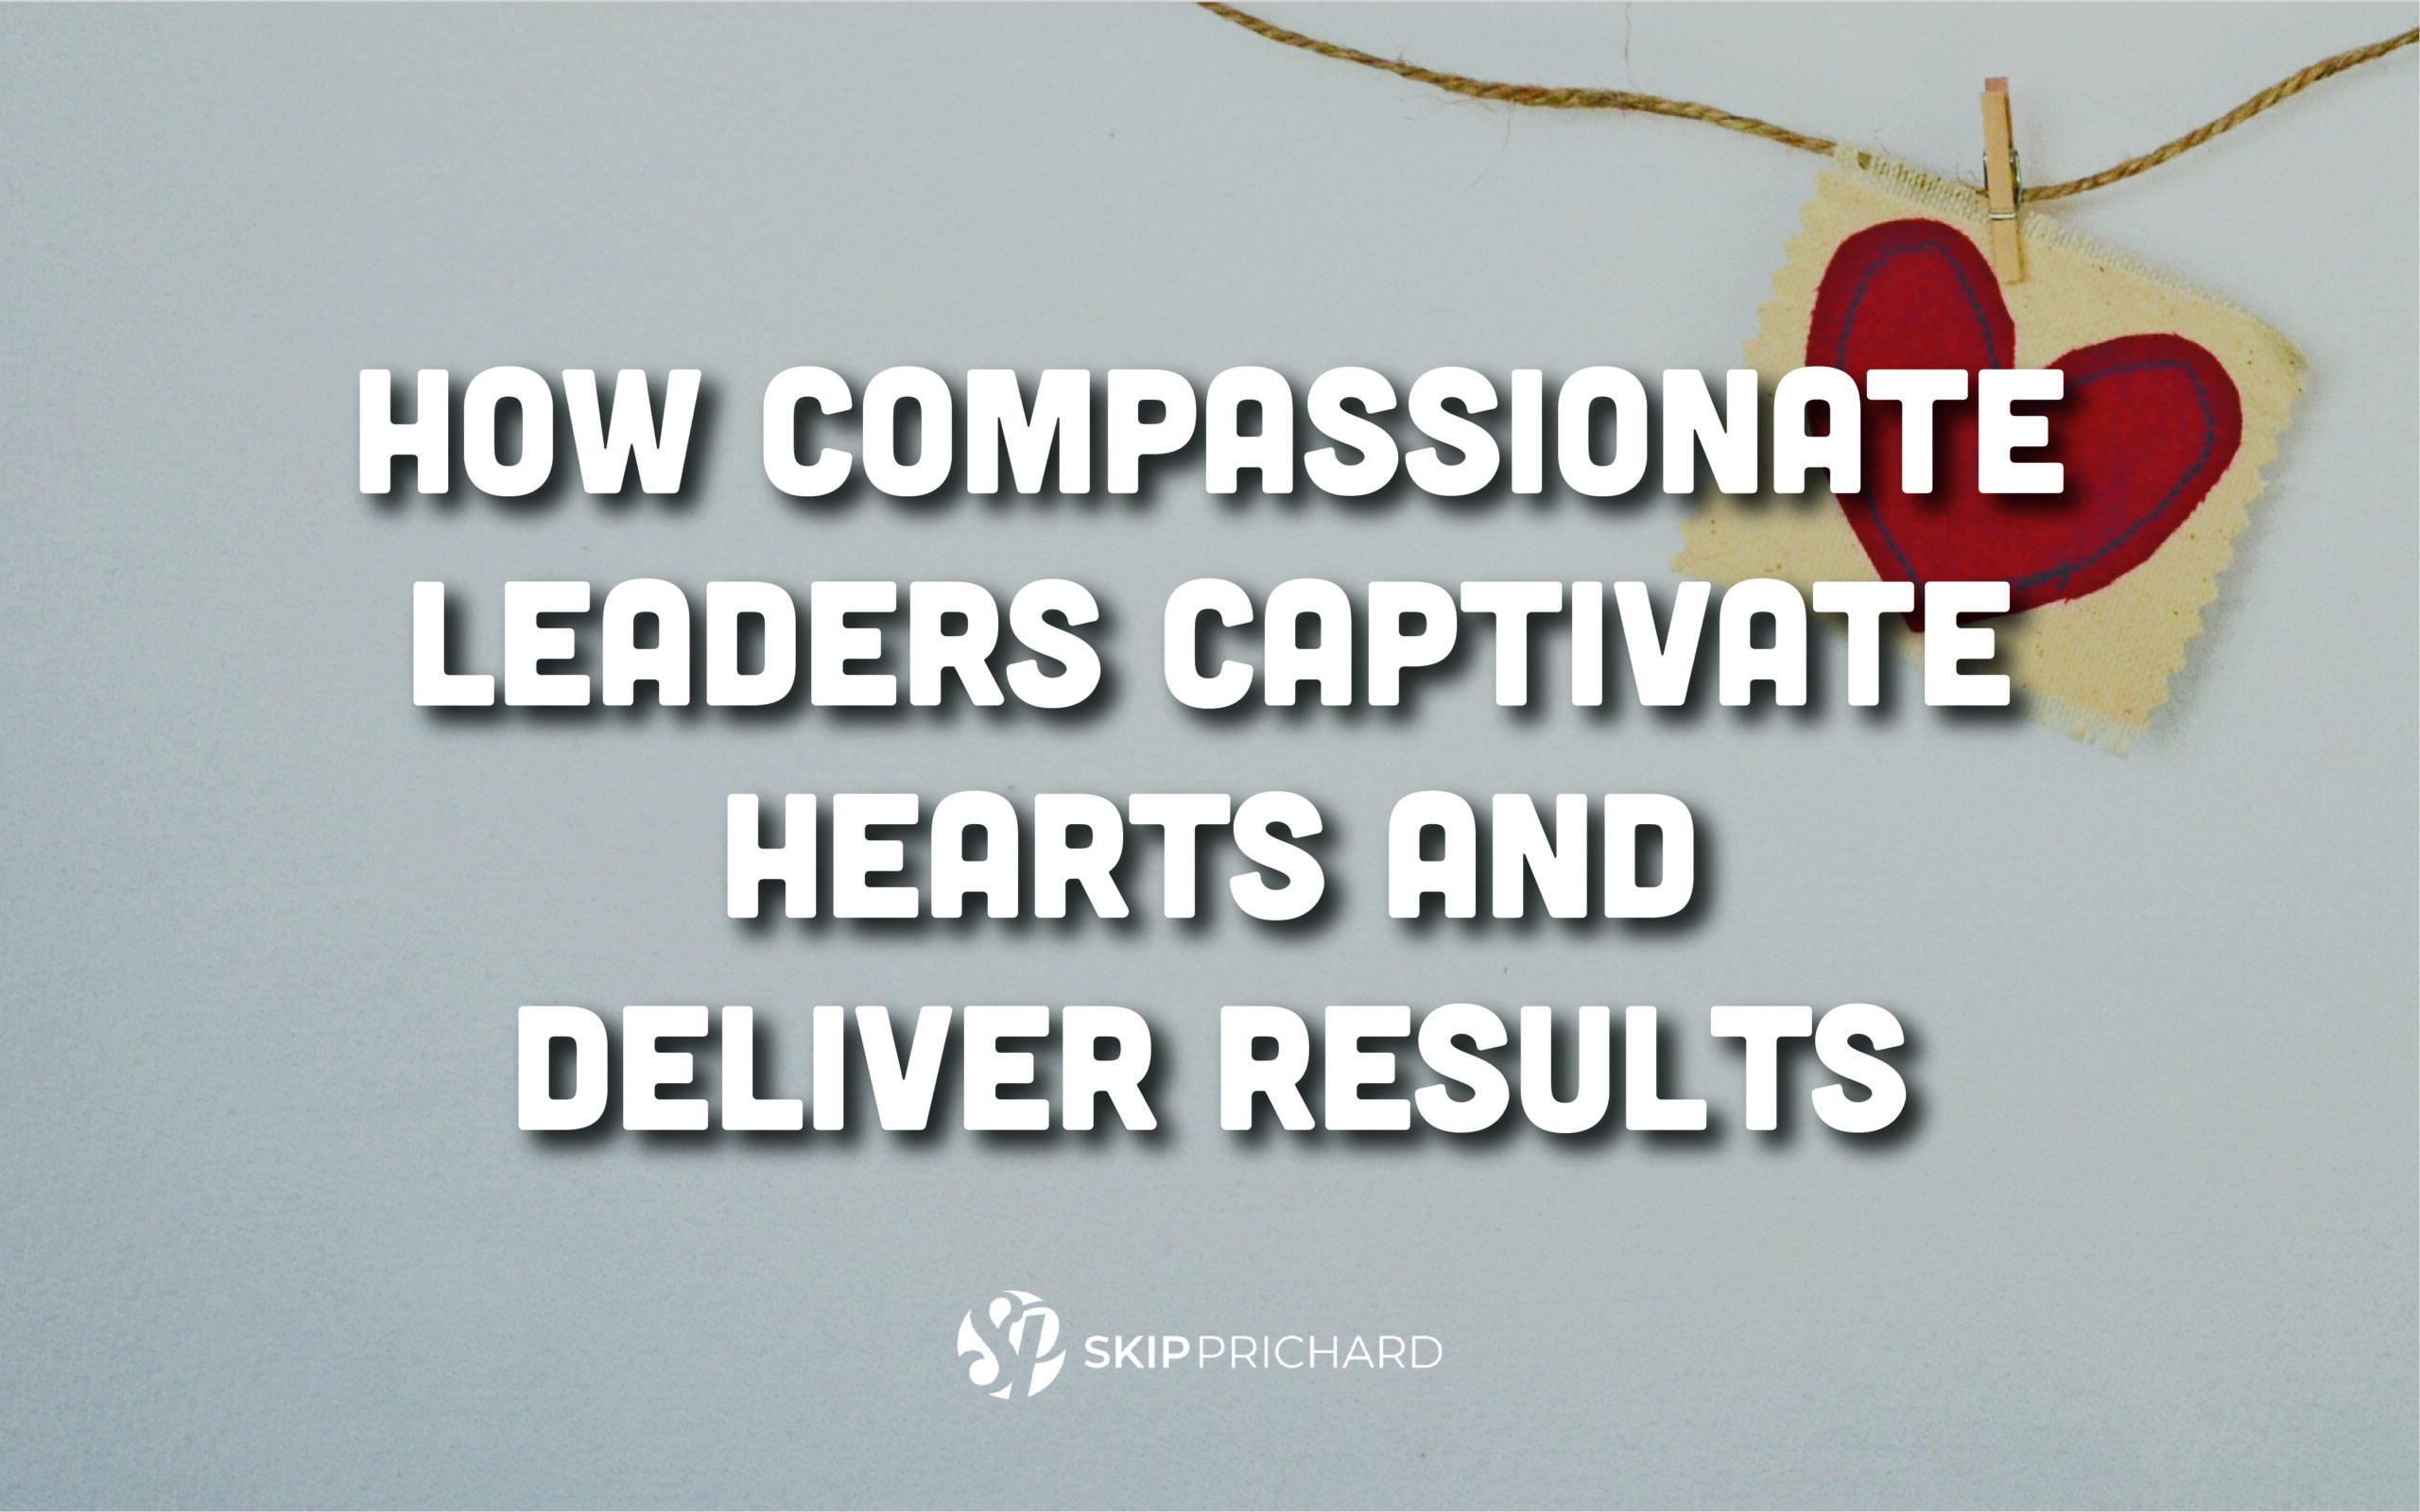 How Compassionate Leaders Captivate Hearts and Deliver Results